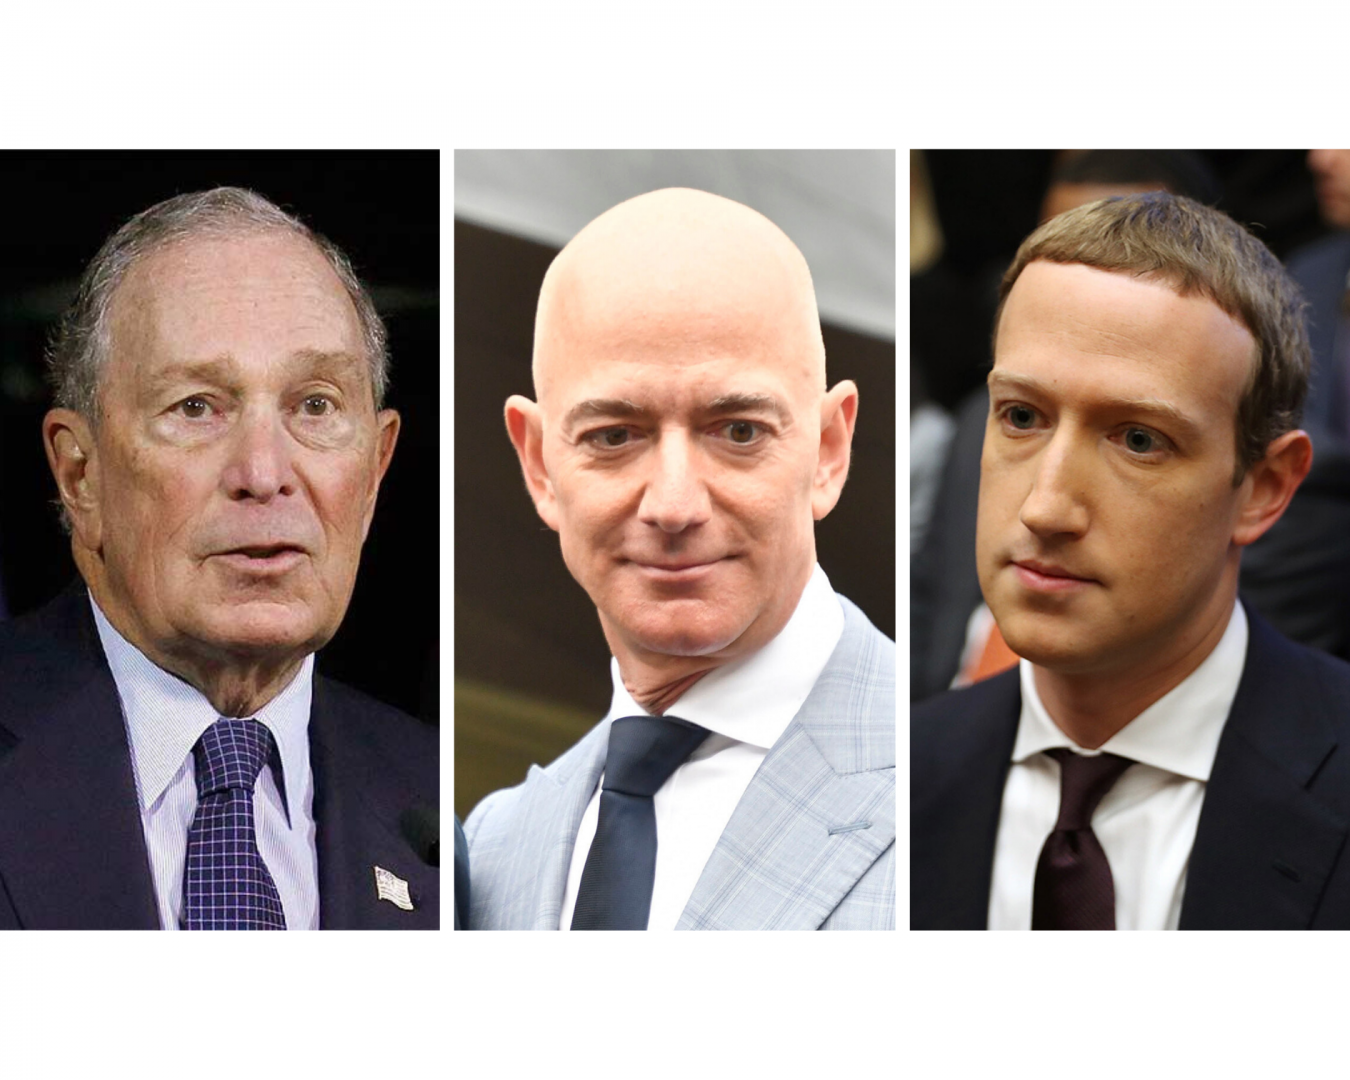 Pictured+left+to+right%3A+Billionaires+Michael+Bloomberg+%28%2460+billion%29%2C+Jeff+Bezos+%28%24119.9+billion%29%2C+and+Mark+Zuckerberg+%28%2468.8+billion%29.+Net+worths+valued+as+of+March+2%2C+2020+via+Forbes.com.+Photos+courtesy+of+Tribune+News+Service